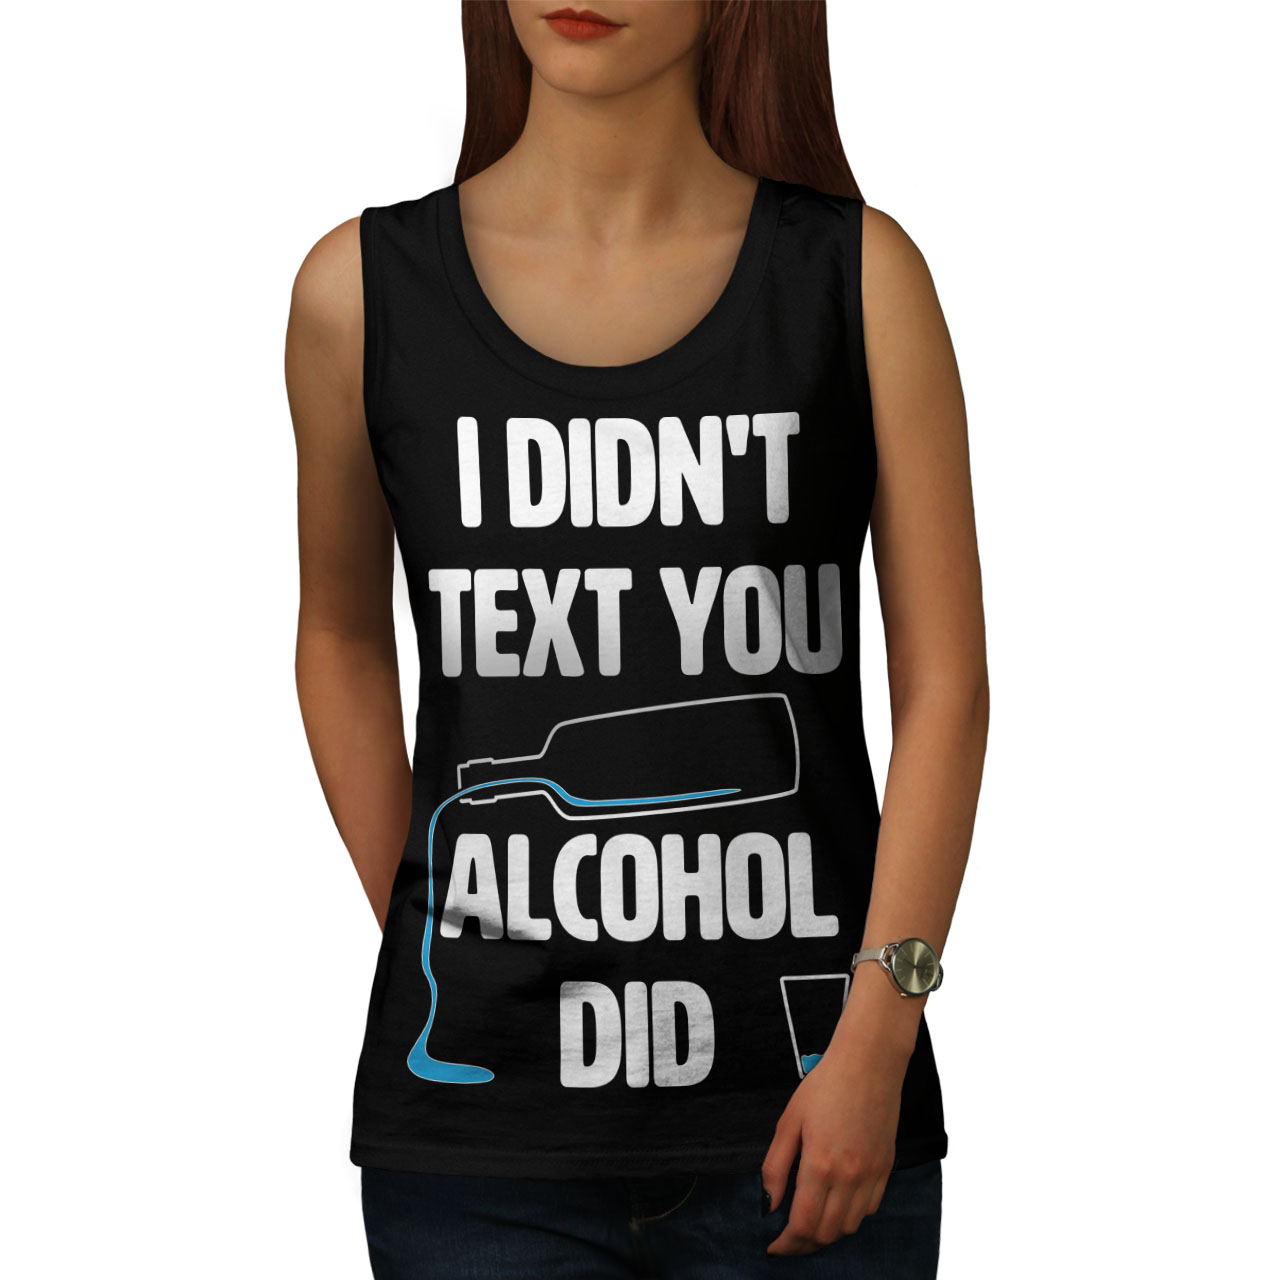 alcool Athletic Sports Shirt Wellcoda alcool texte vous Femme Tank Top 